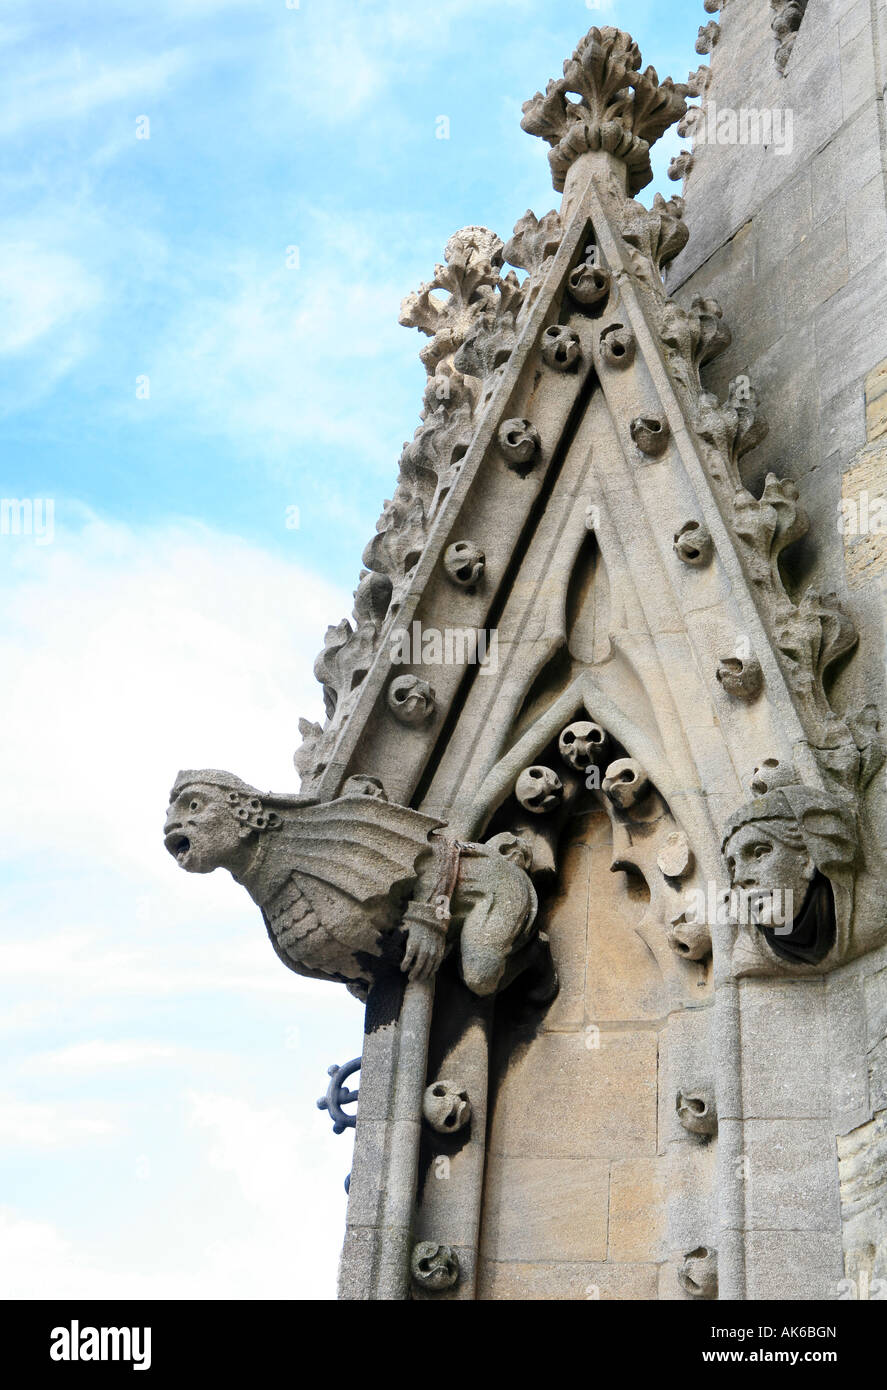 A weathered gargoyle on the spire of a church in Oxford, England Stock Photo